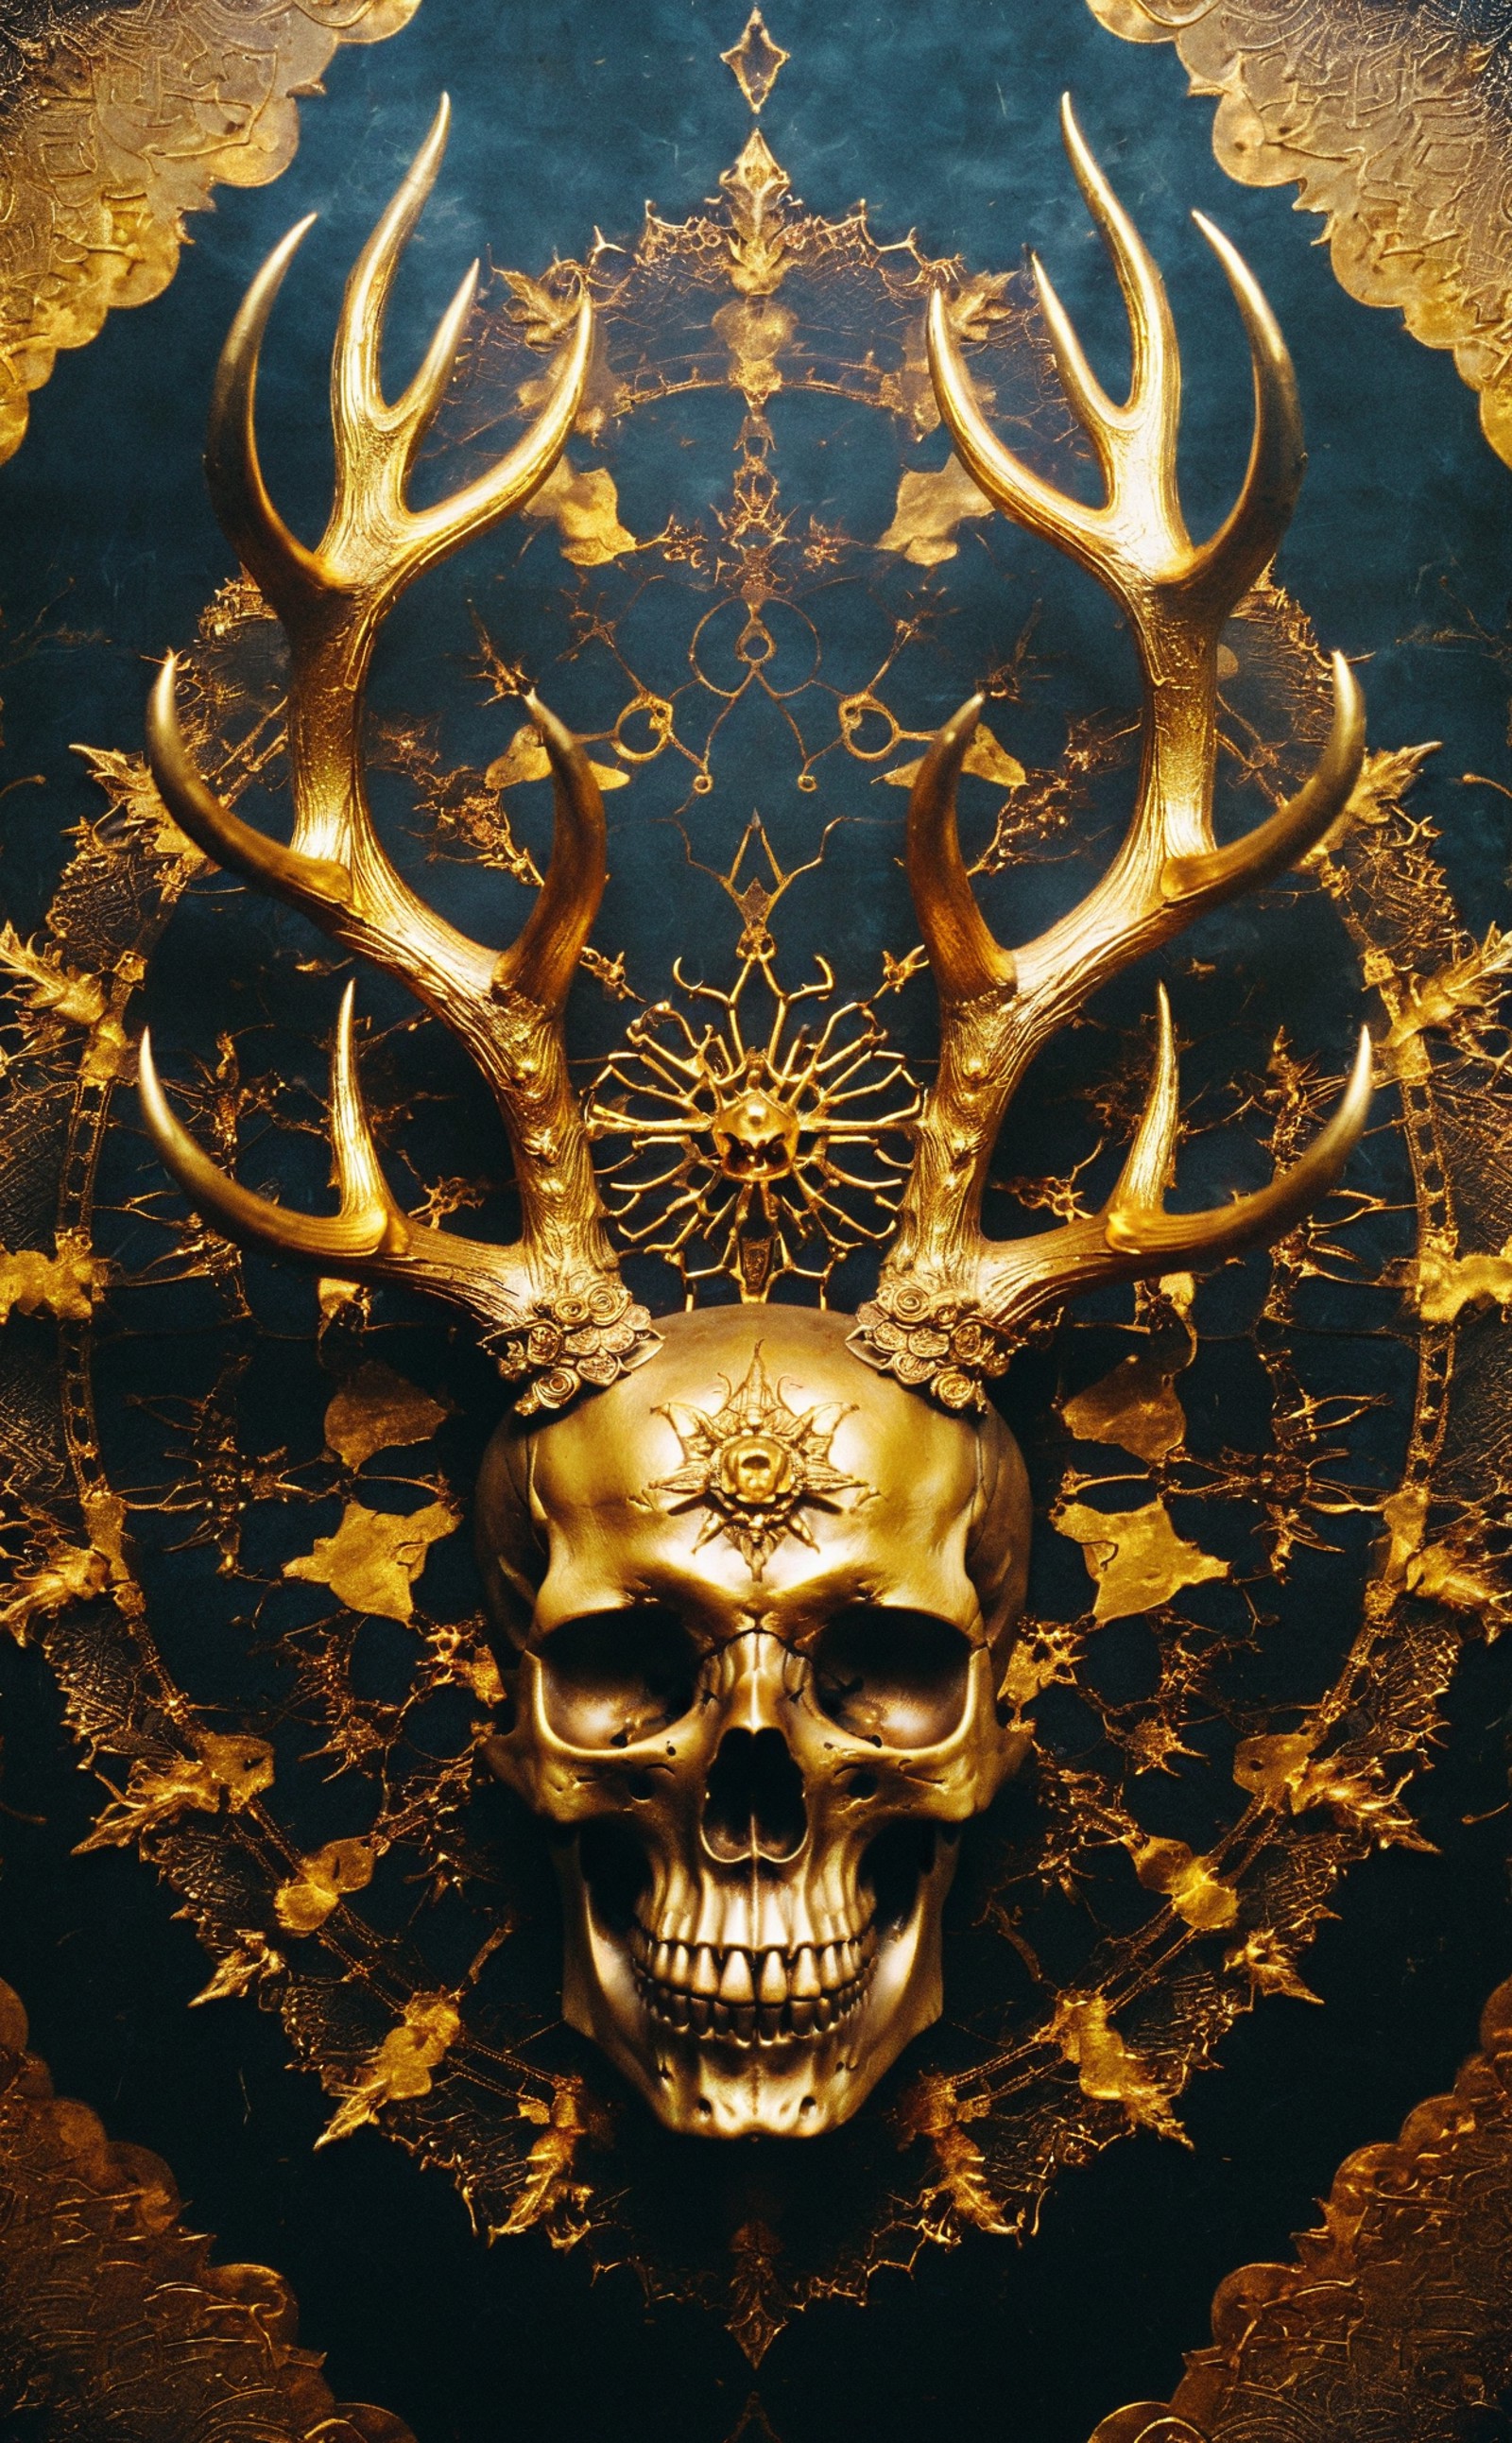 film photography aesthetic,Majestic skull adorned with golden antlers, intricate mandala motif background, bronze and gold...